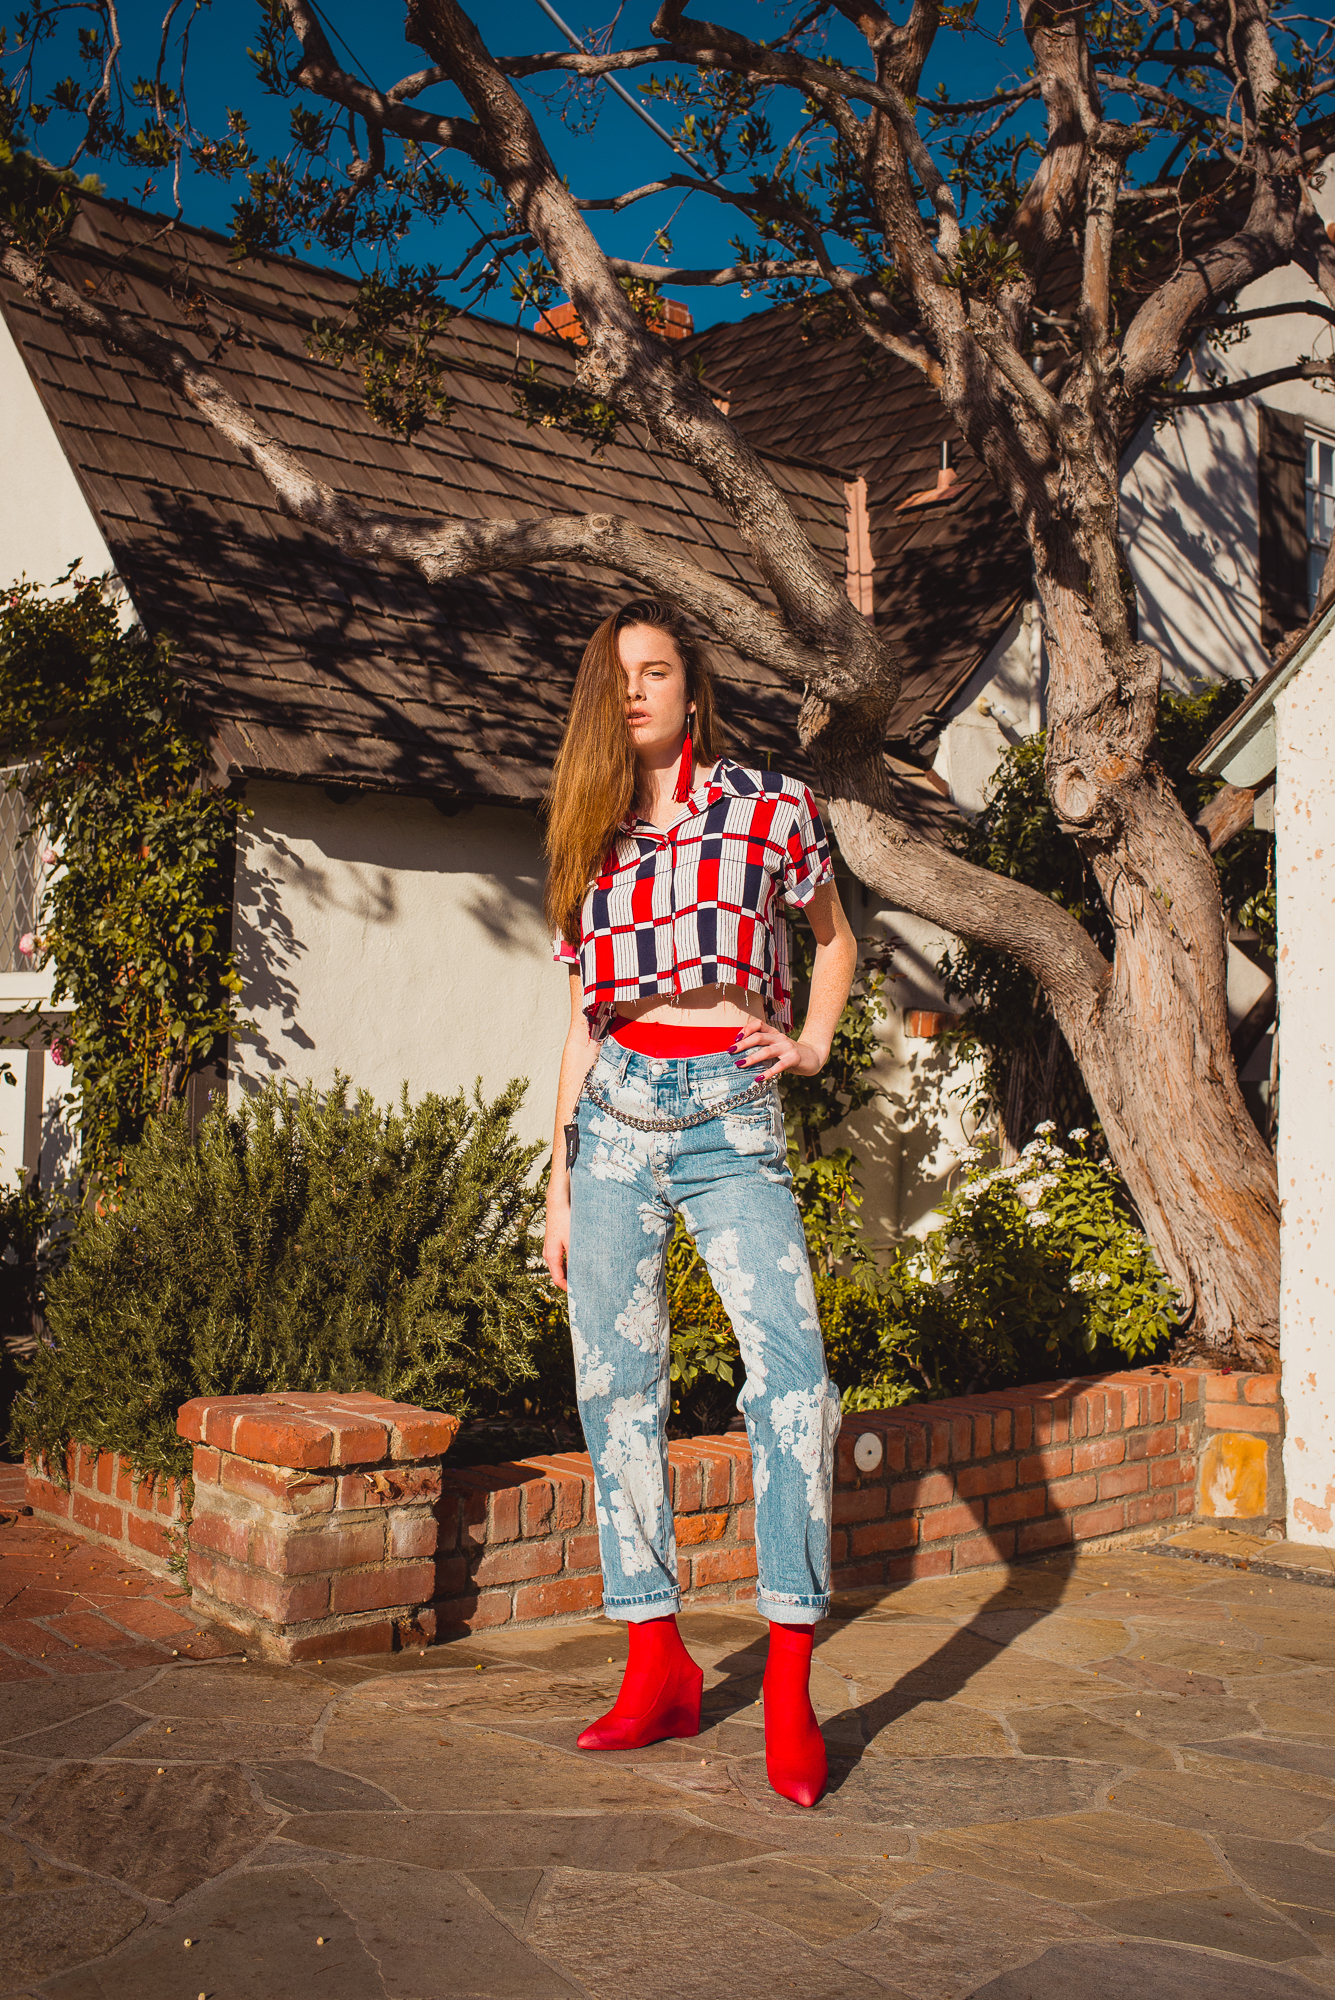 Sunny Delight - Editorial by Helen Merwin